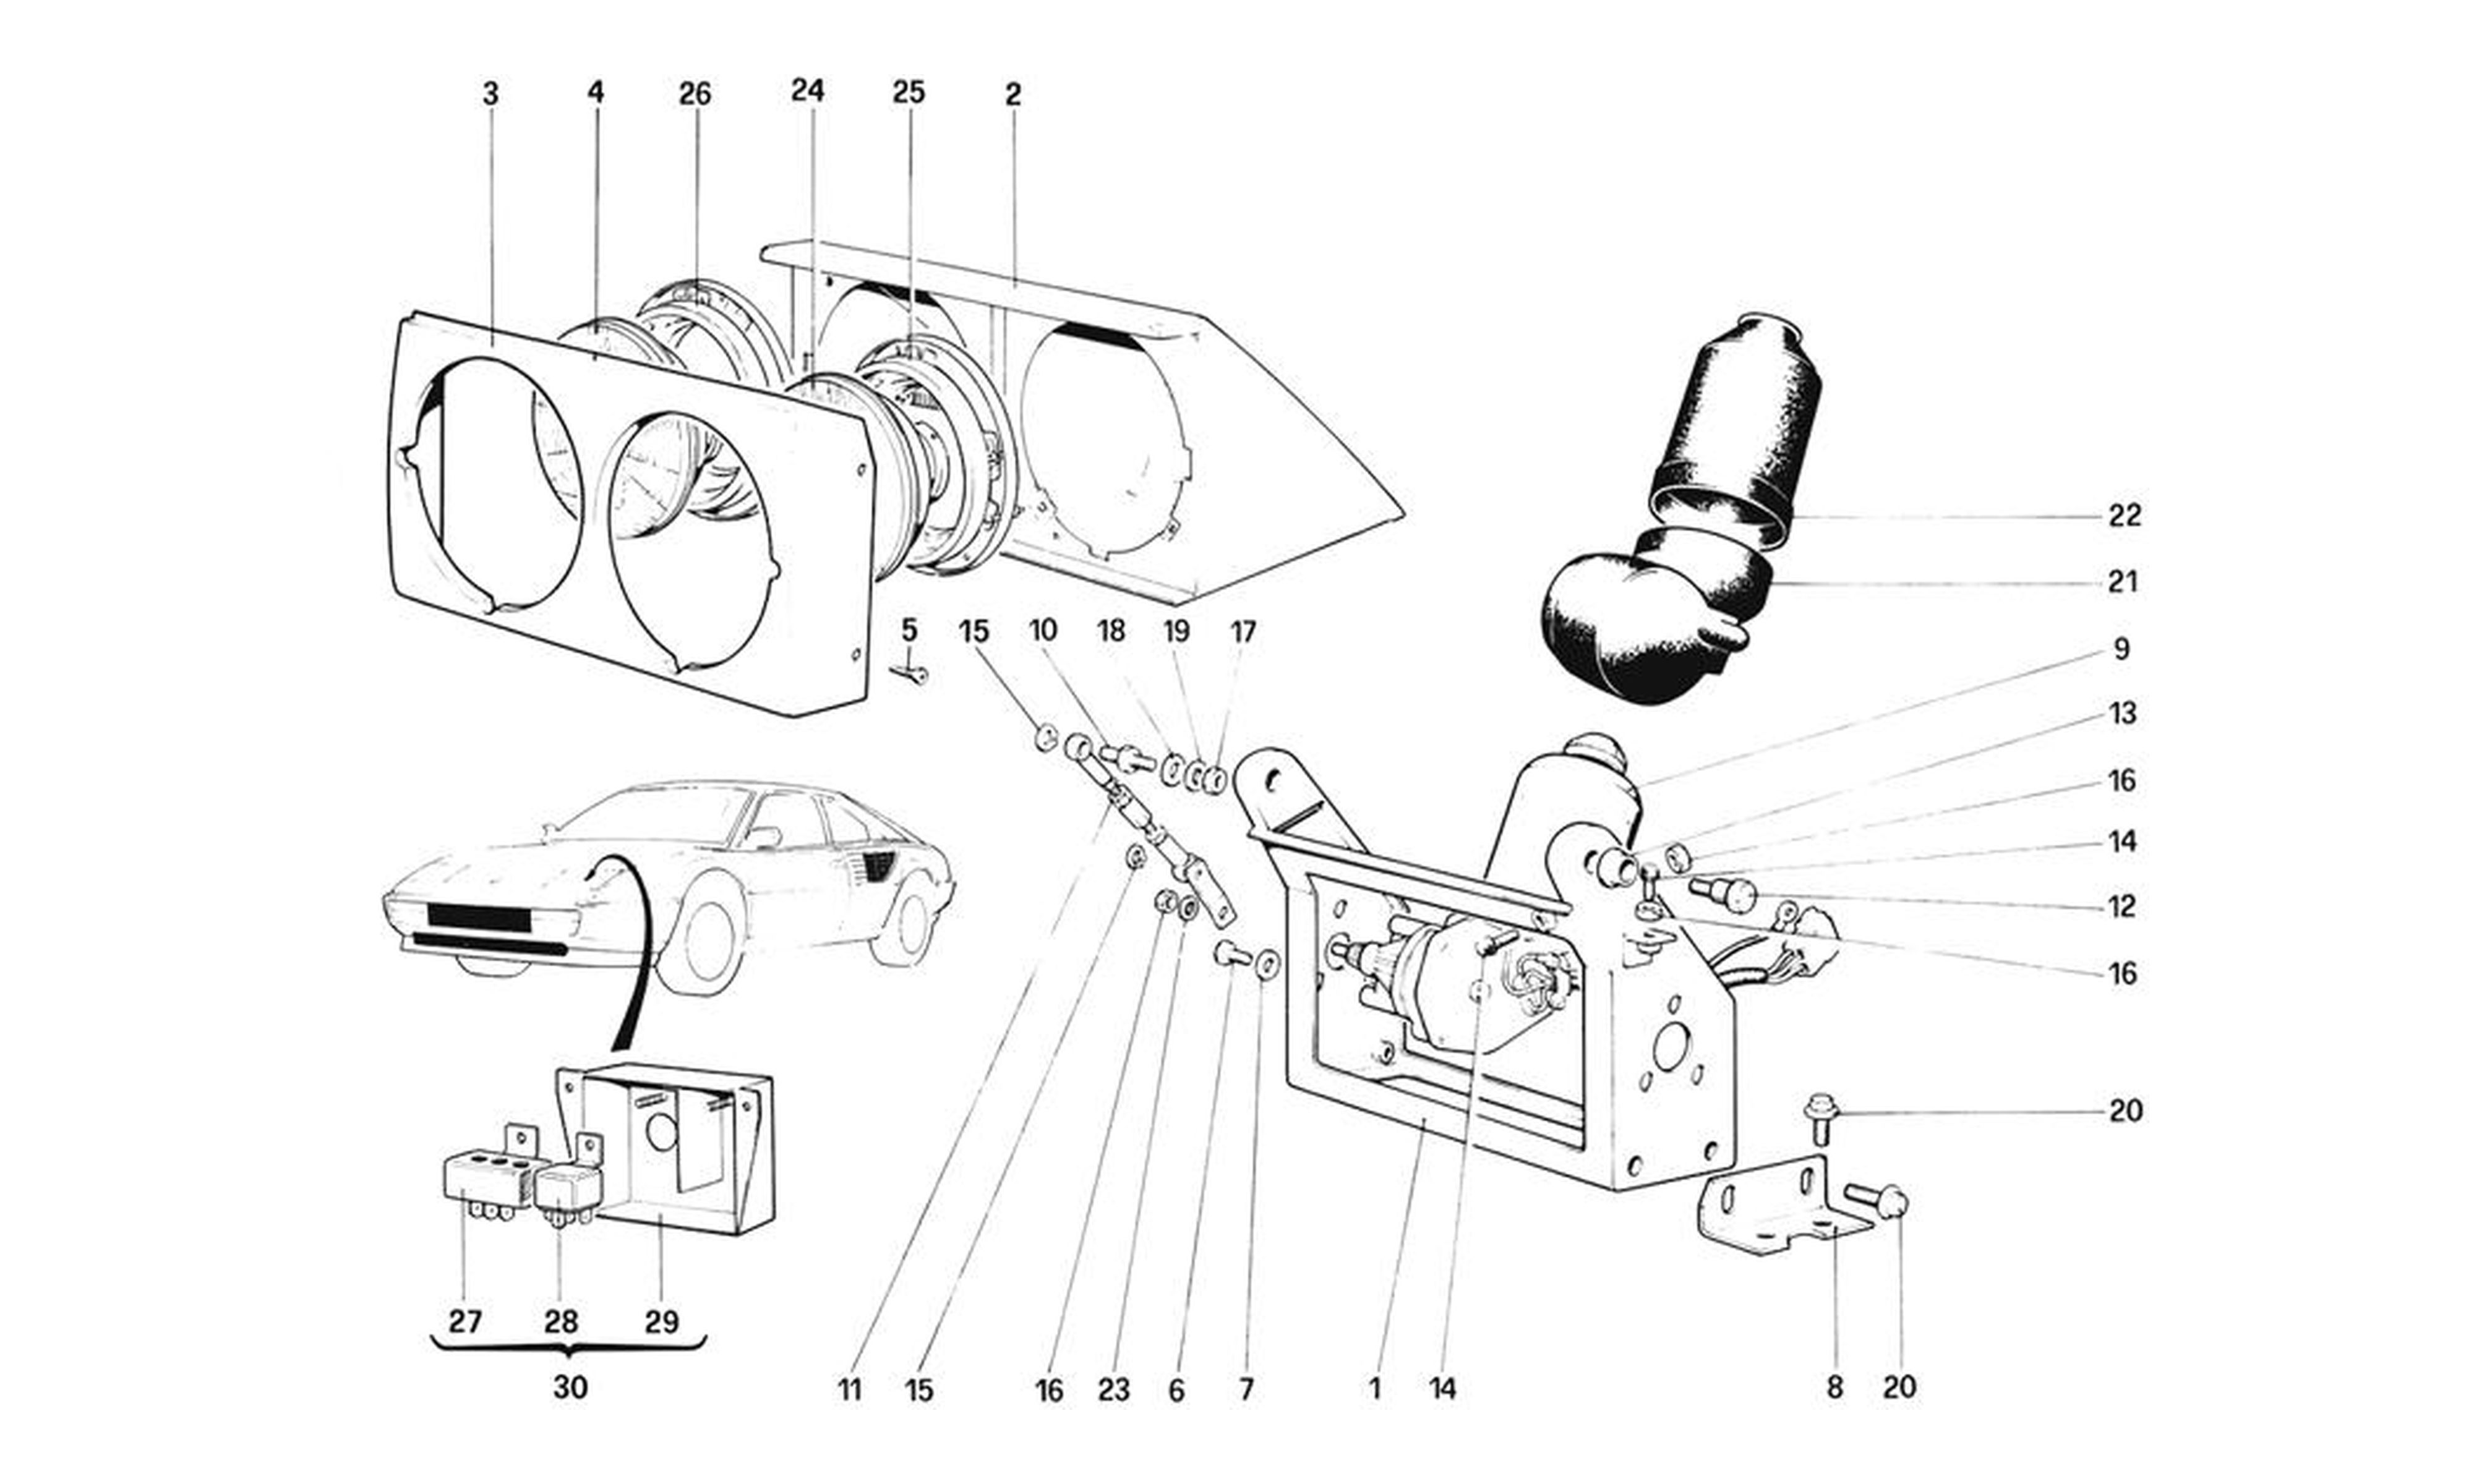 Schematic: Headlights Lifting Device And Headlights